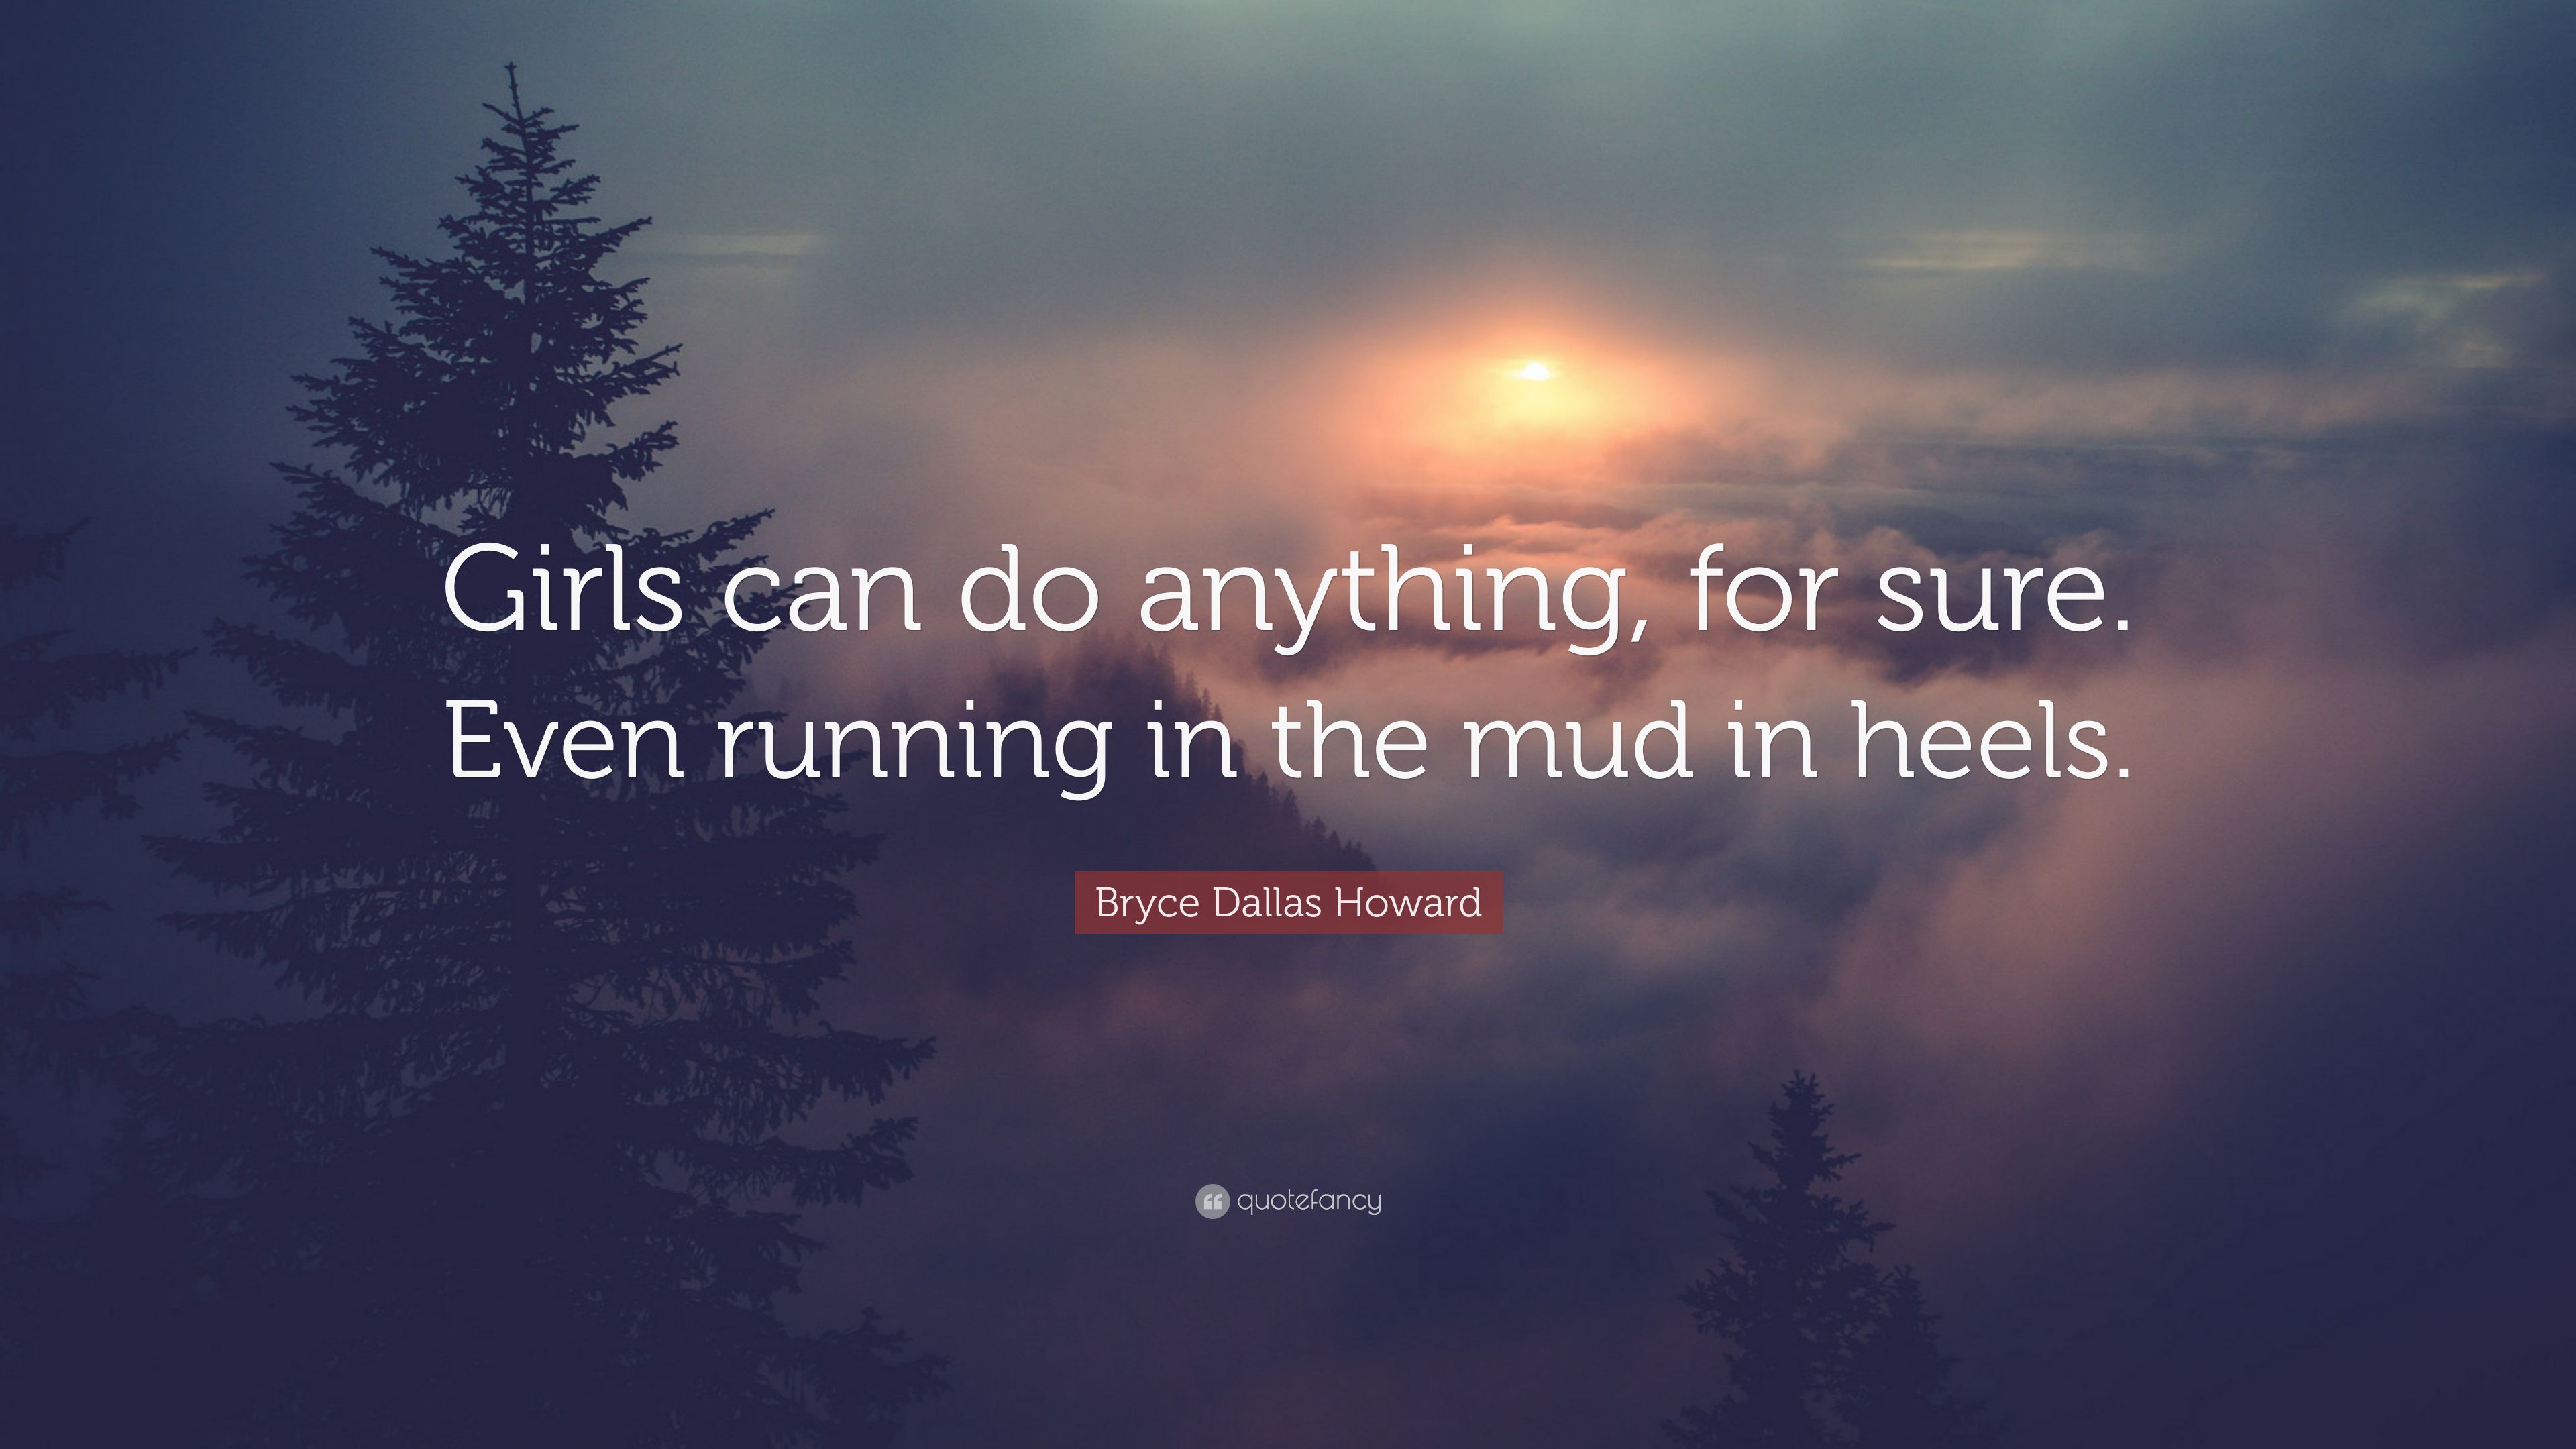 Bryce Dallas Howard Quote: “Girls can do anything, for sure. Even running in the mud in heels.” (7 wallpaper)